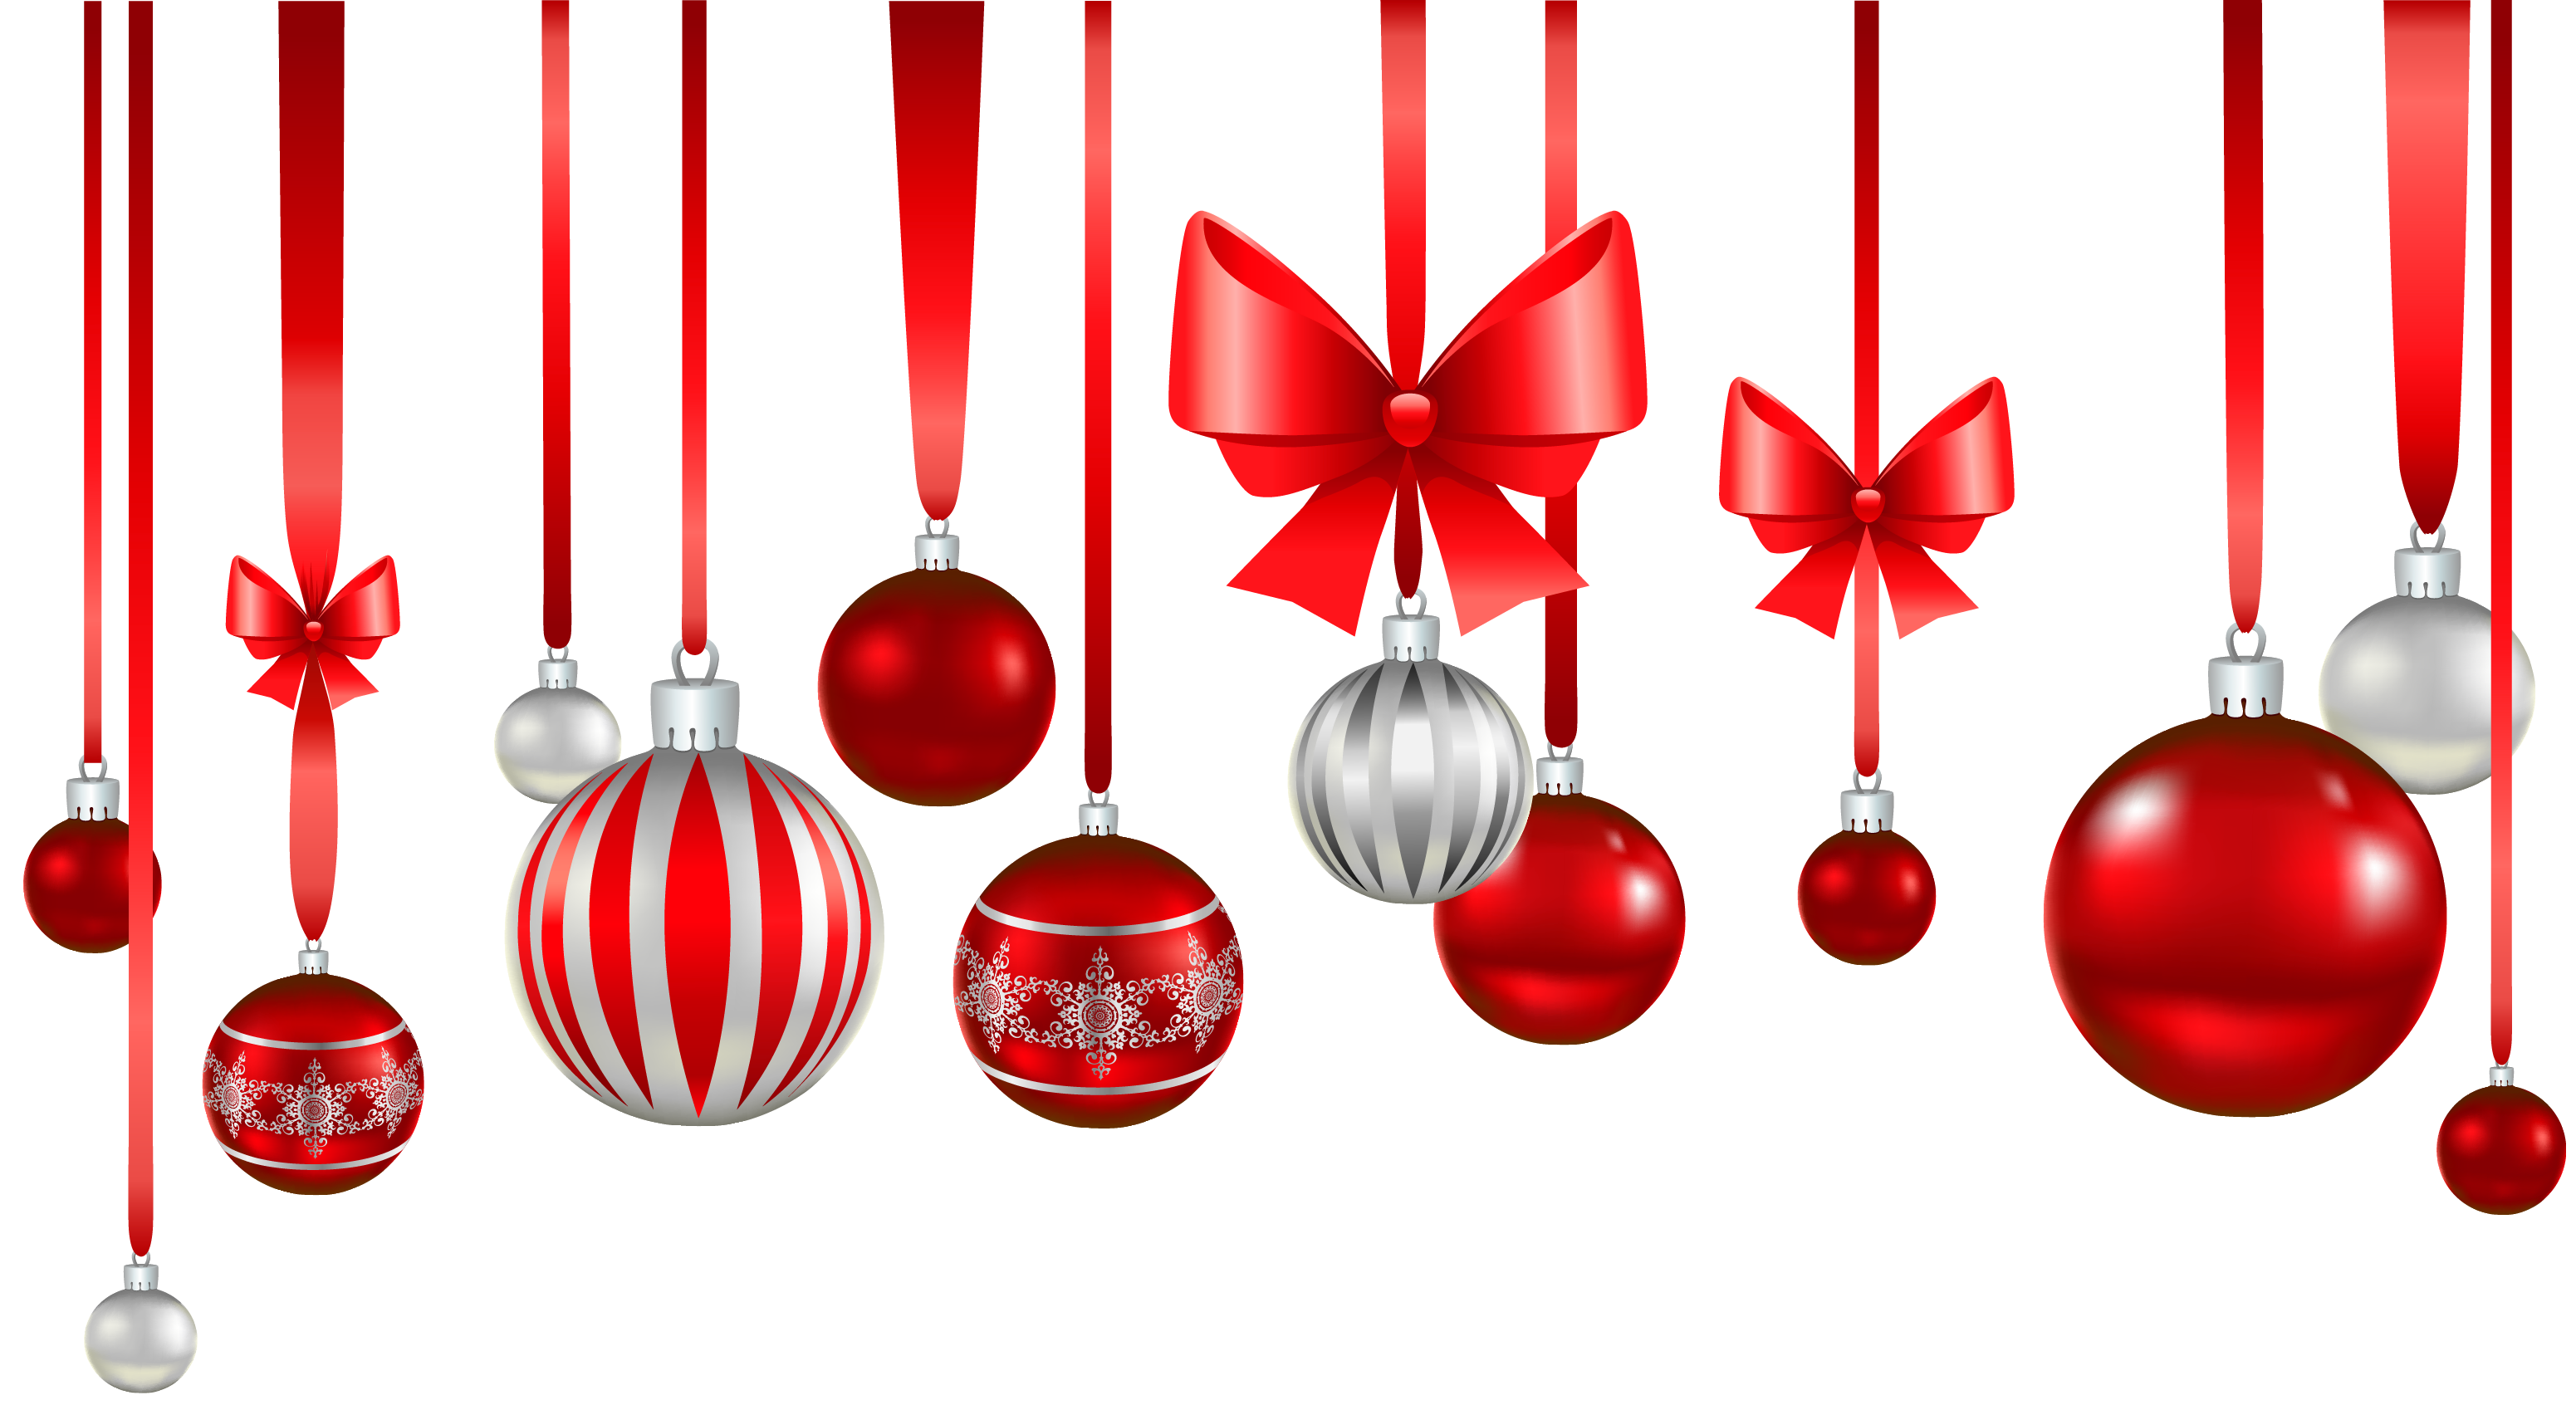 Xmas Images Free Png - Christmas Fun, Transparent background PNG HD thumbnail